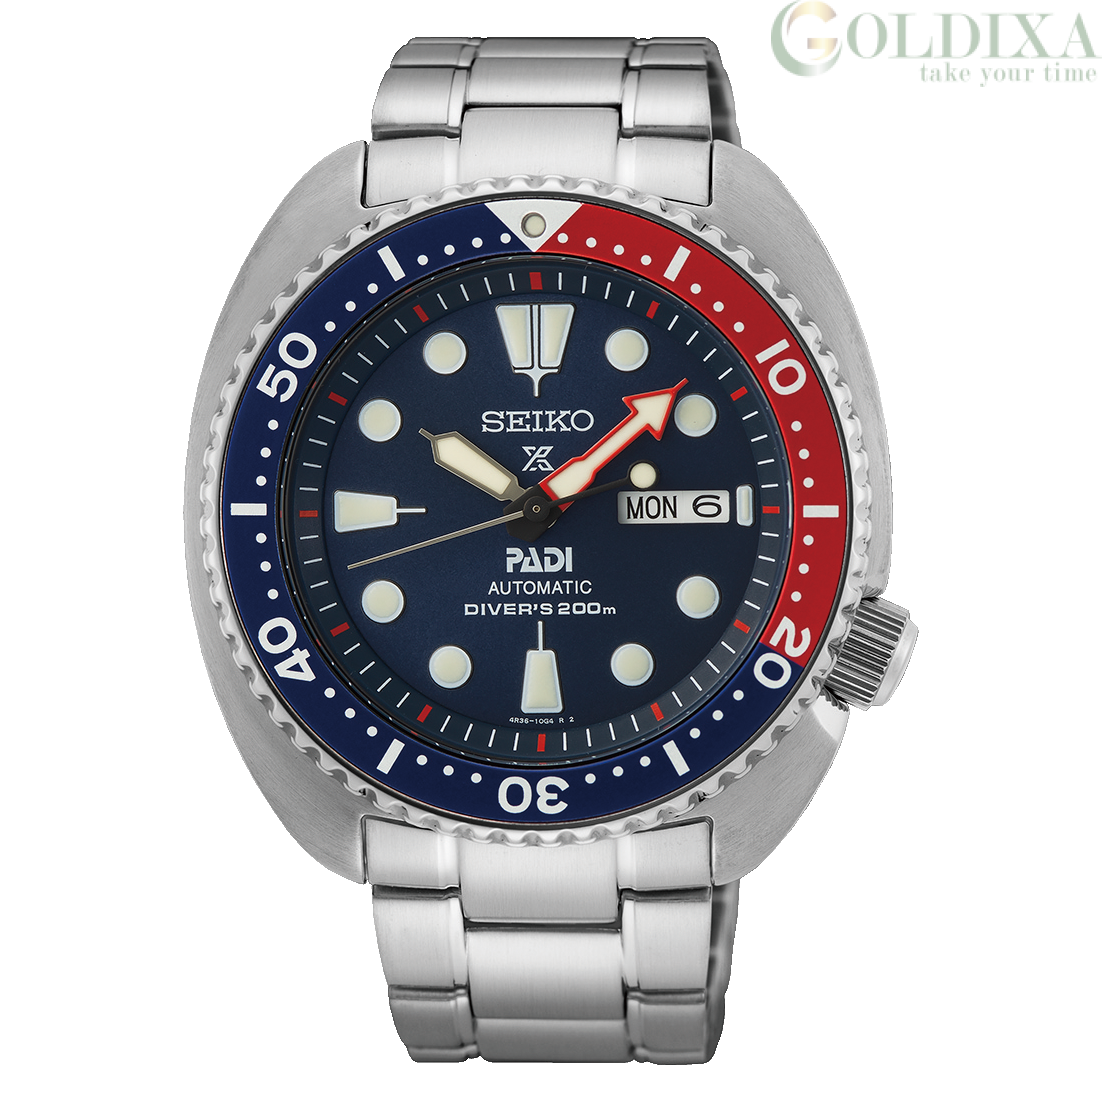 Watches: Seiko Padi turtle Prospex red and blue men's watch SRPE99K1